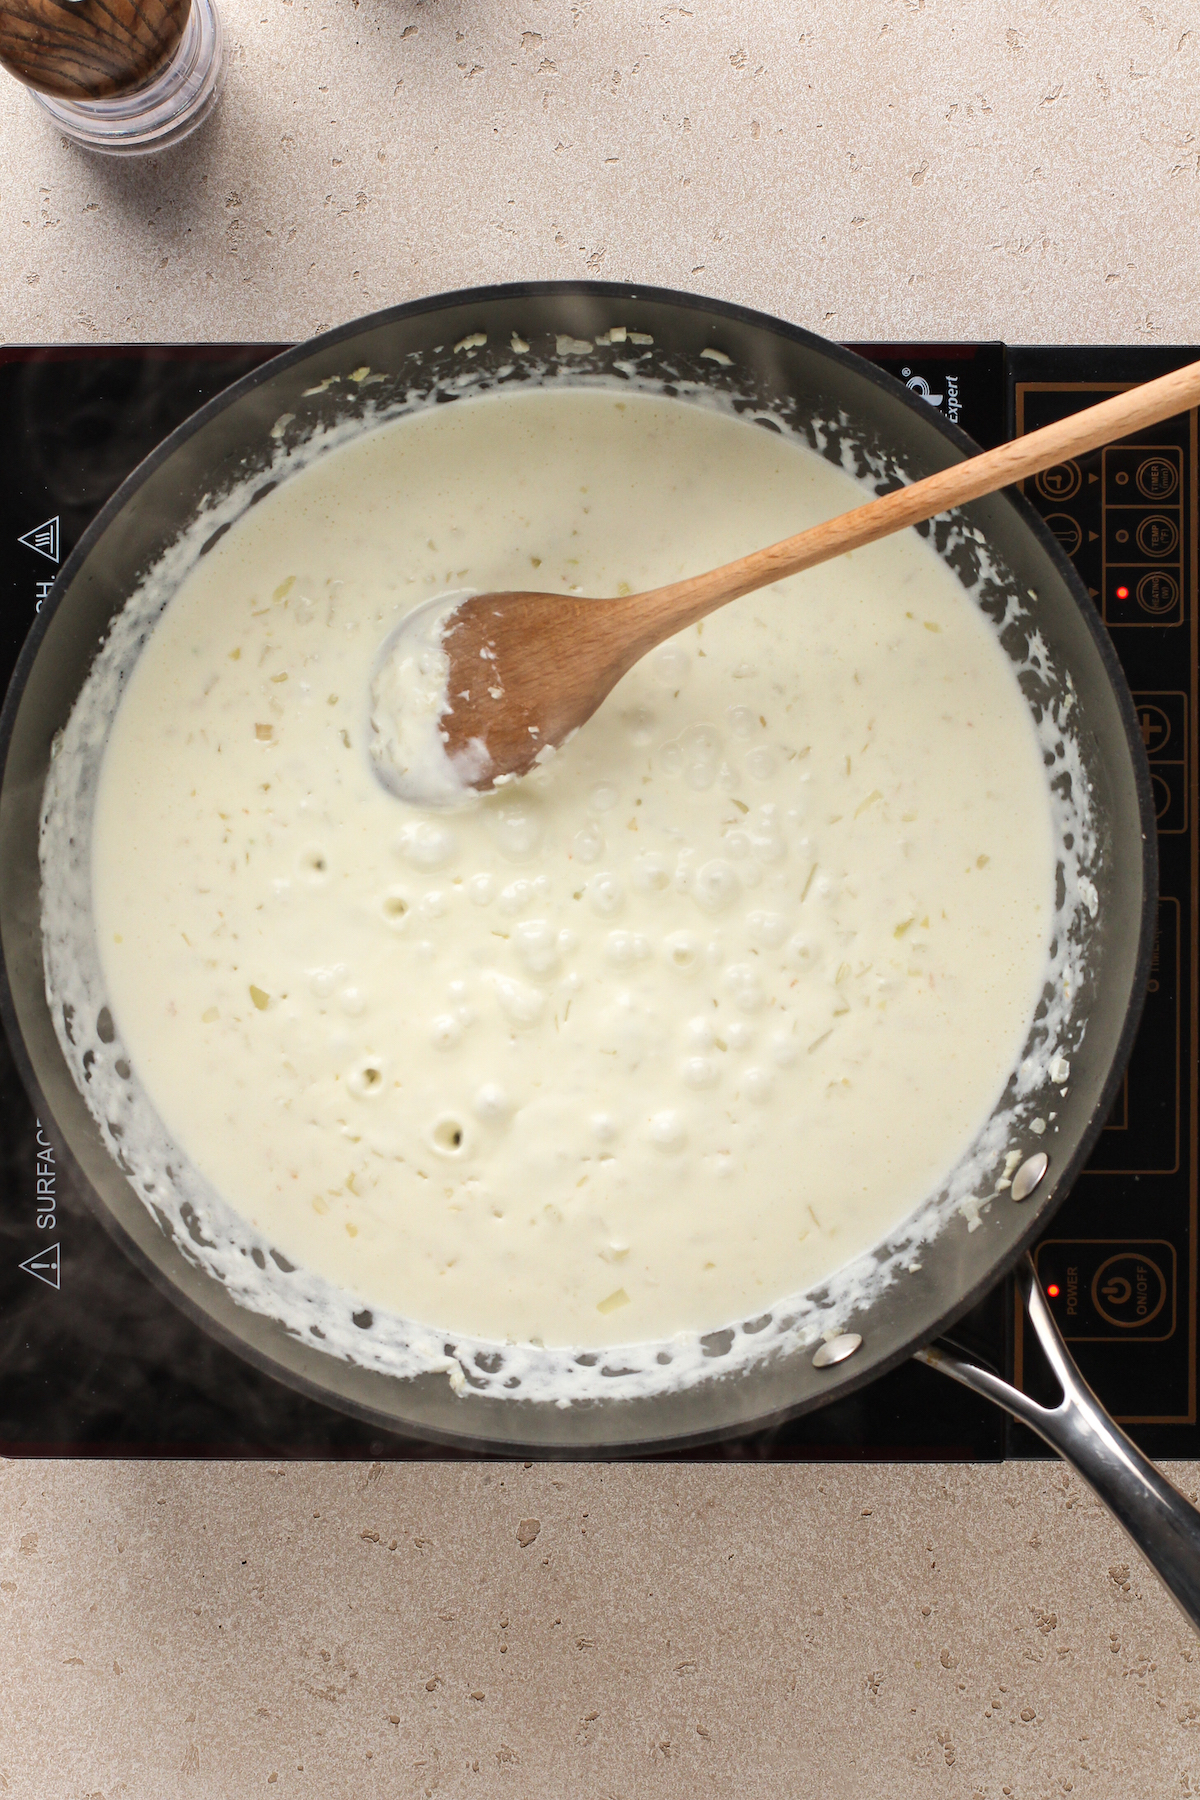 Creamy white sauce in a skillet with a wooden spoon stirring it.